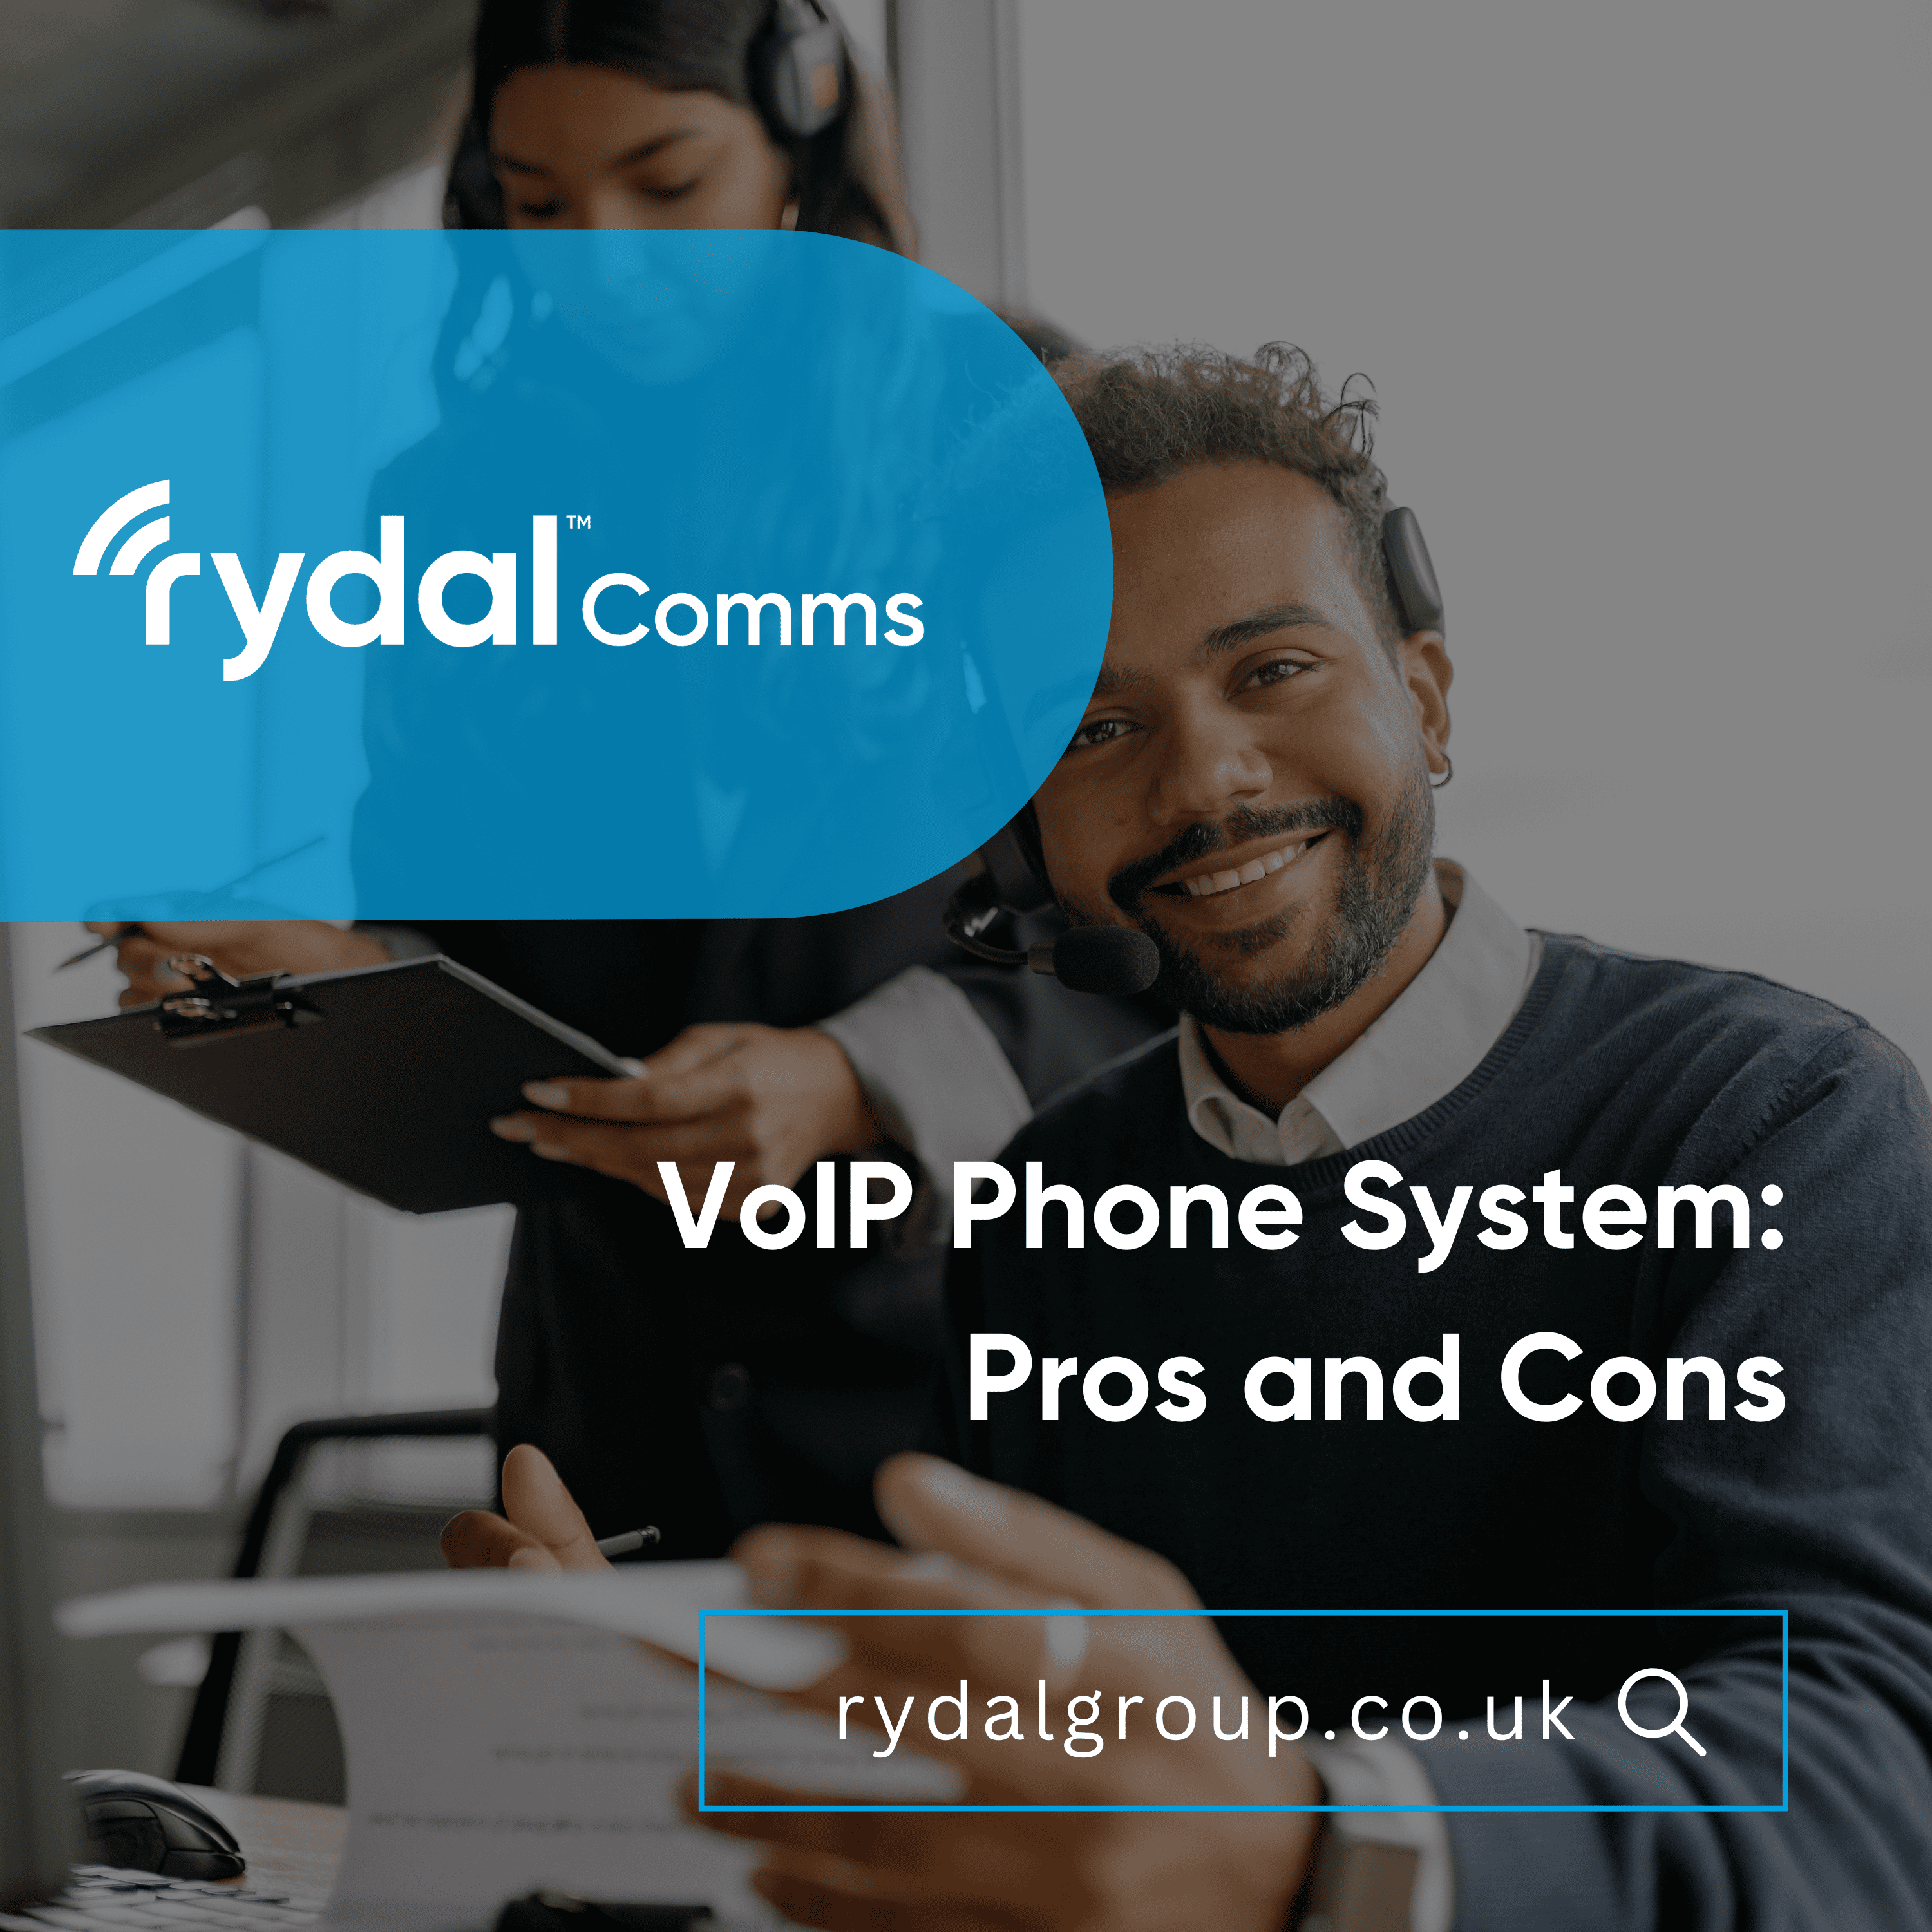 VoIP phone system pros and cons